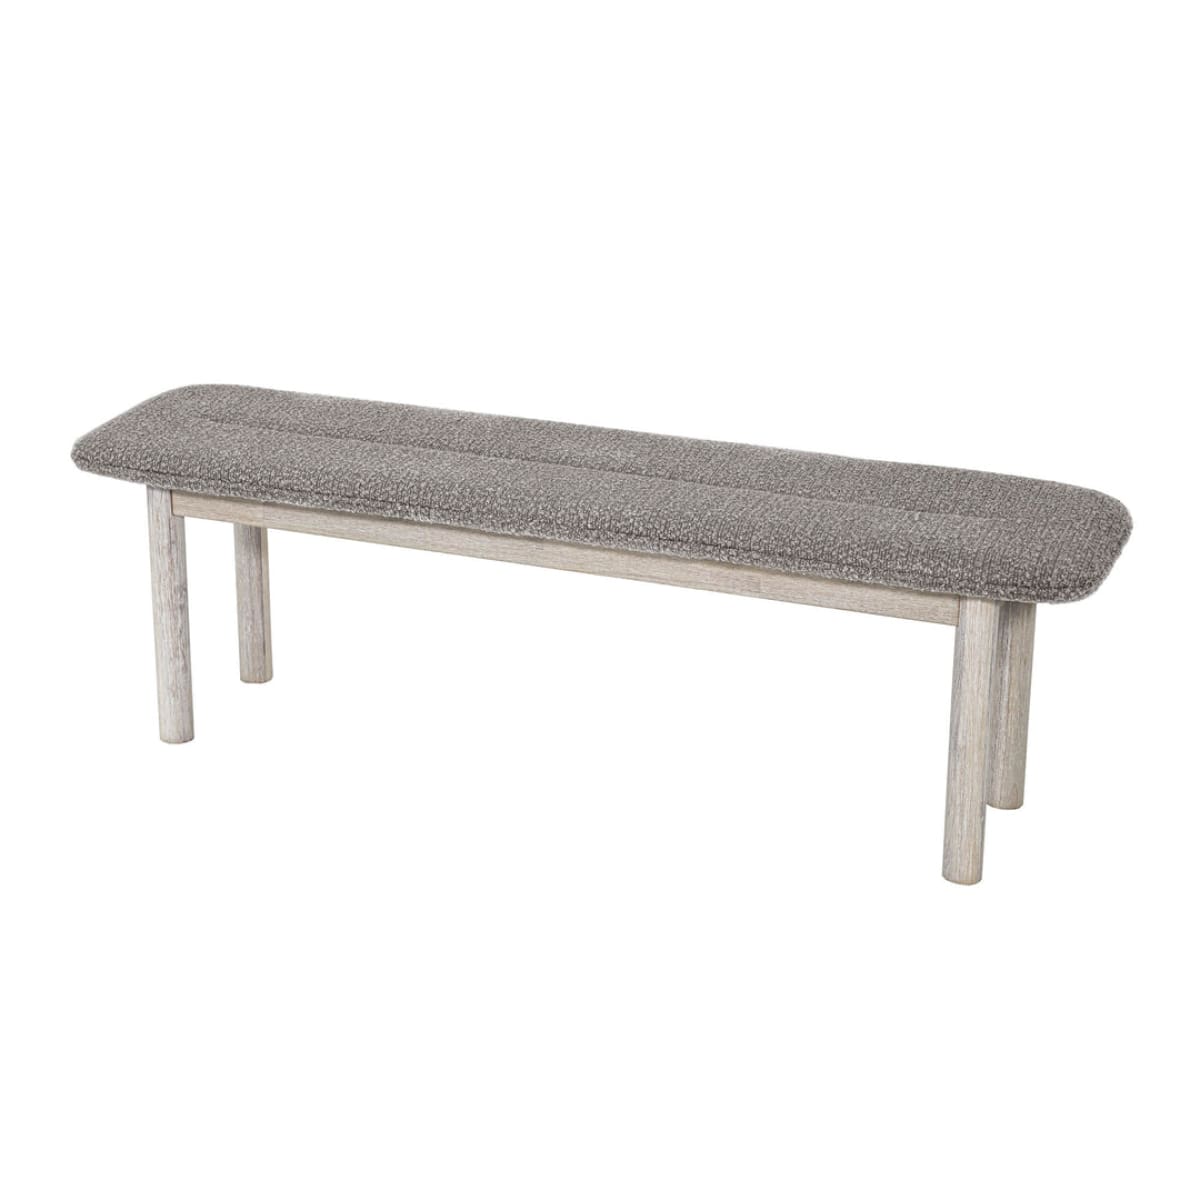 Oasis Bench - Oatmeal - lh-import-dining-benches